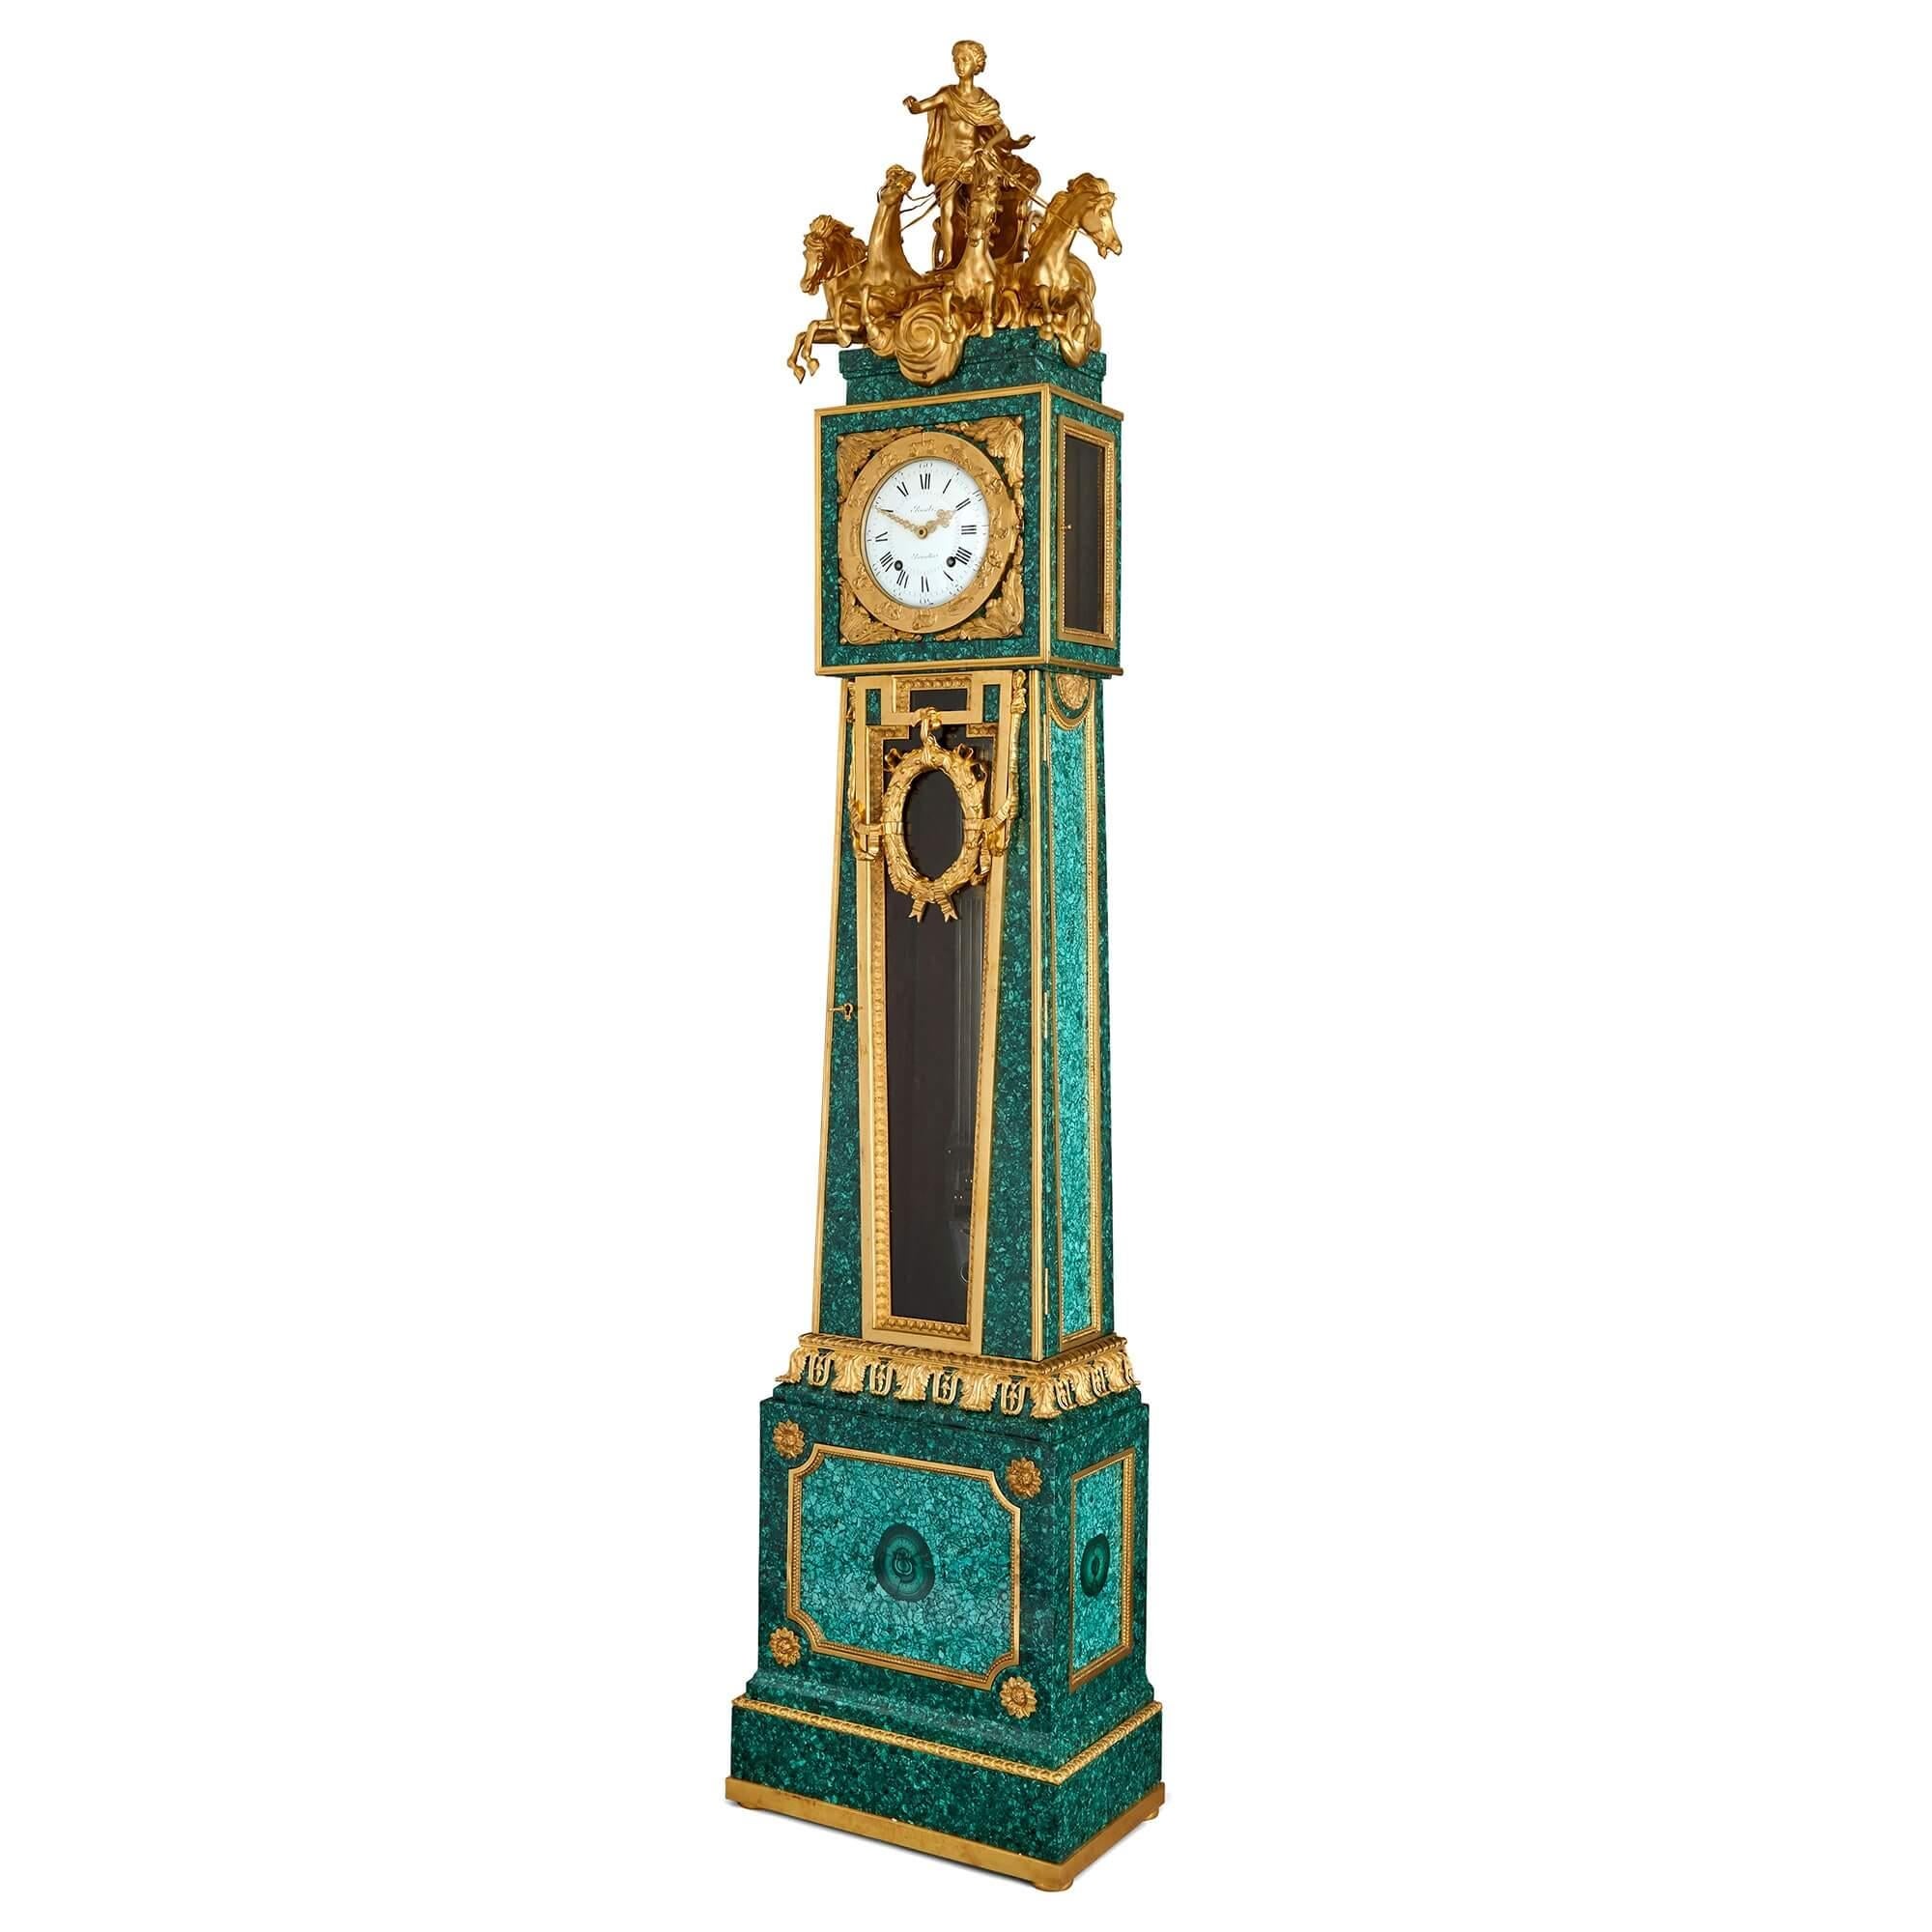 Exceptional Louis XVI style gilt bronze and malachite grandfather clock
French, late 19th century
Measures: Height 250cm, width 54cm, depth 33cm

This superb longcase clock is a wonderful example of the Belle Époque impetus to draw inspiration